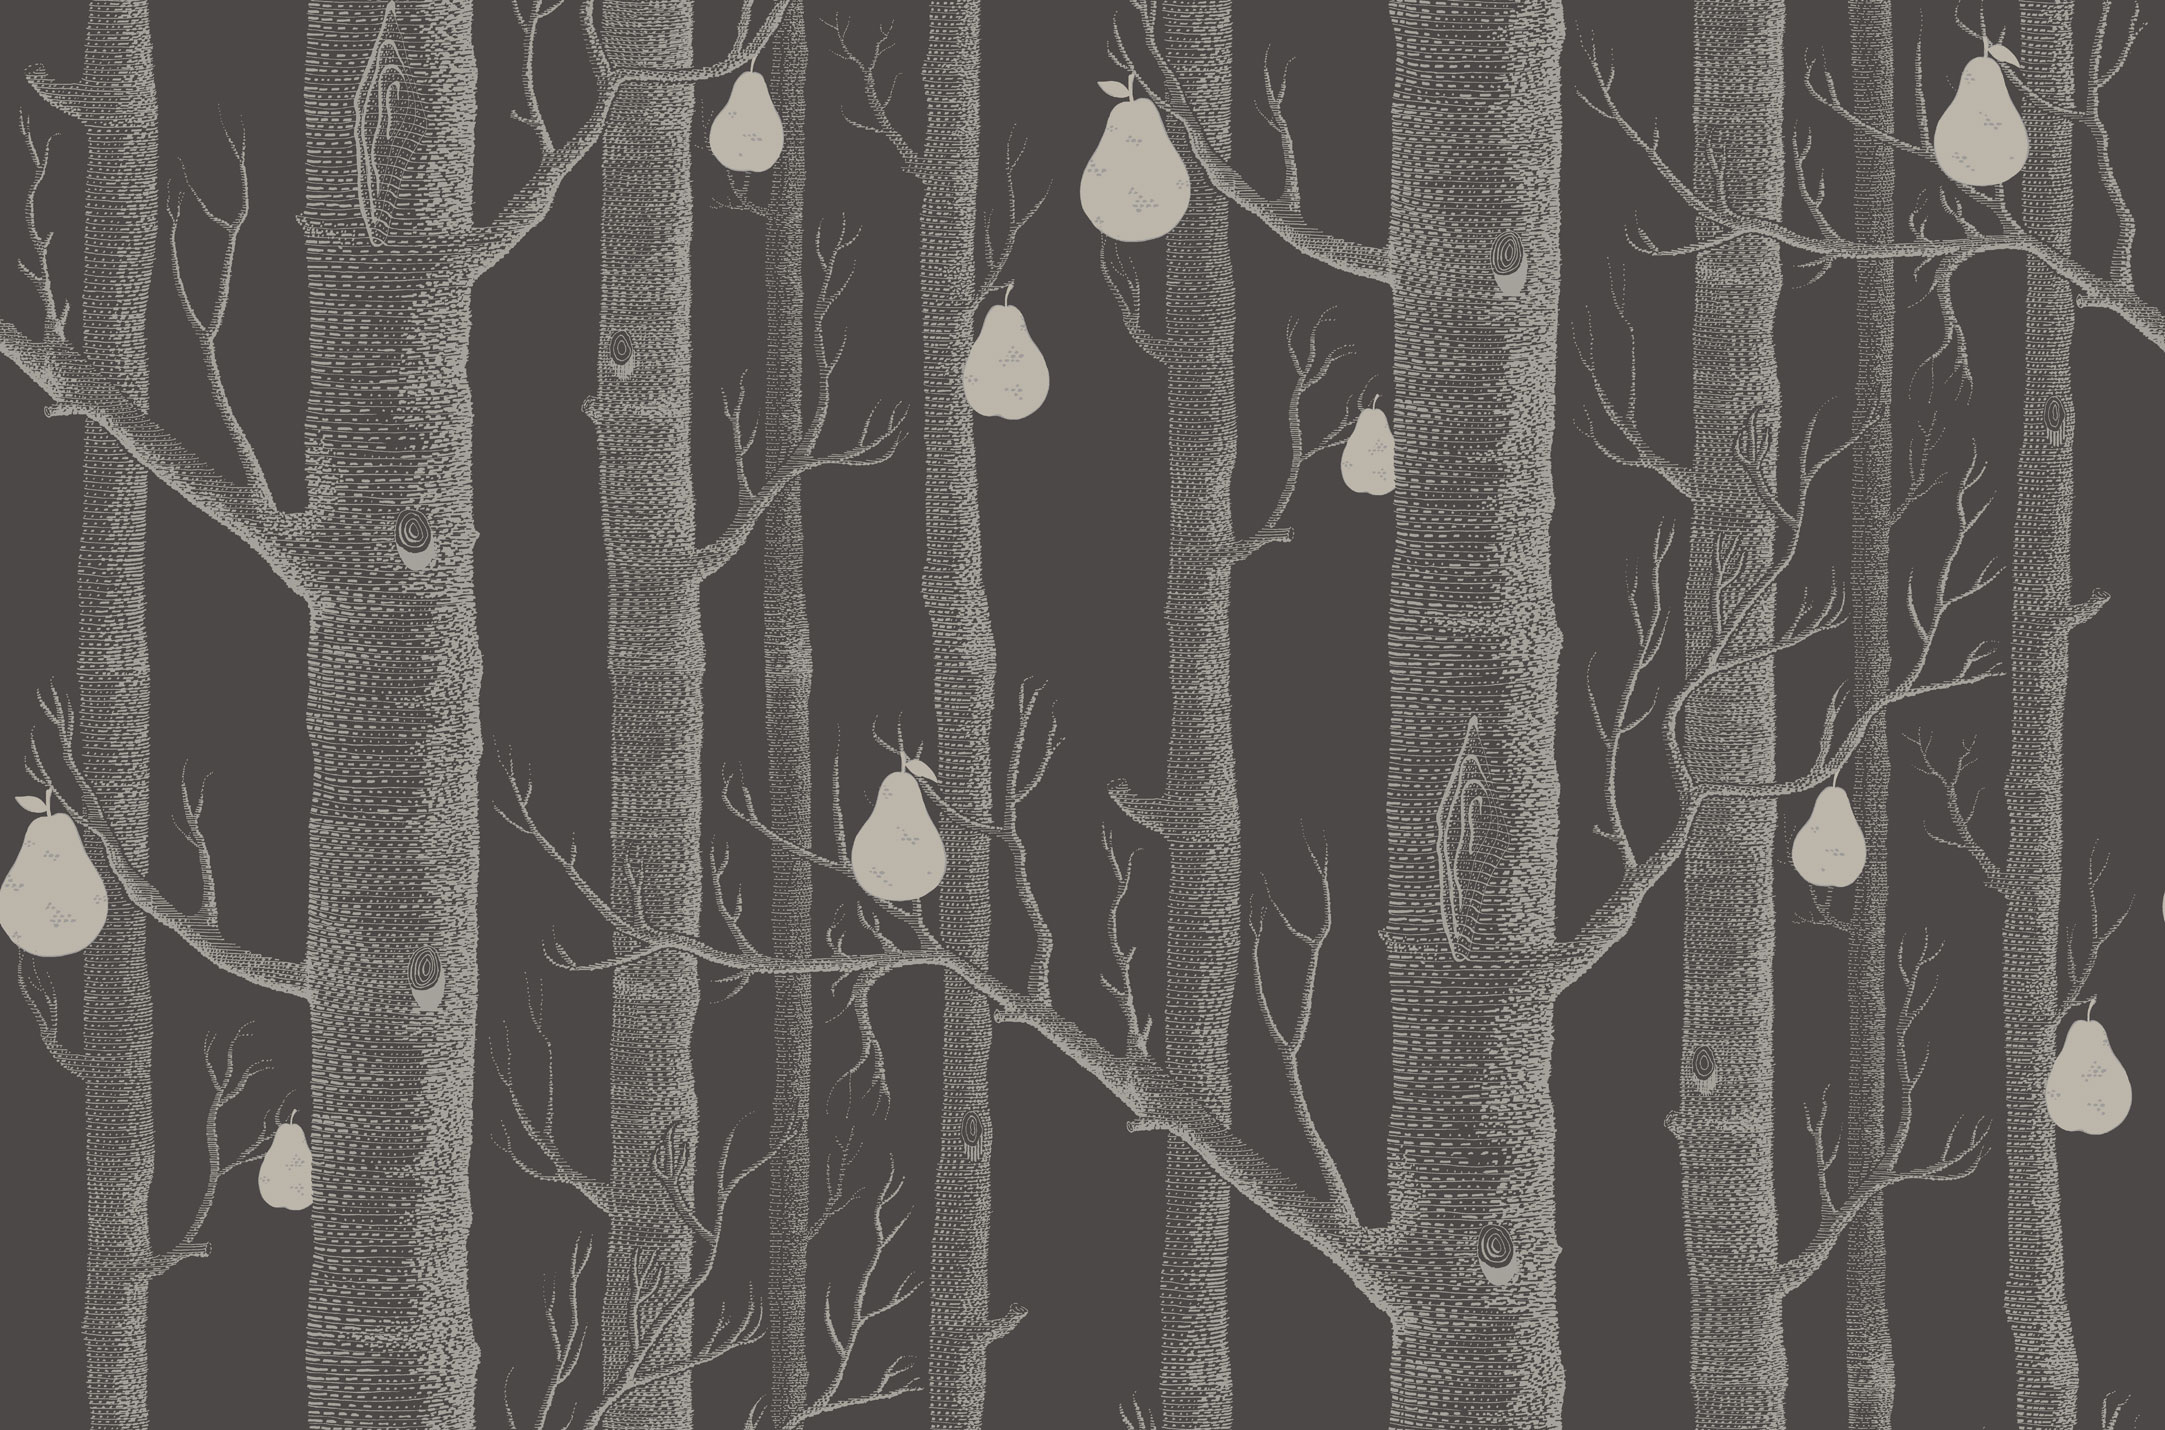 woods and pears wallpaper,black,branch,tree,natural environment,black and white